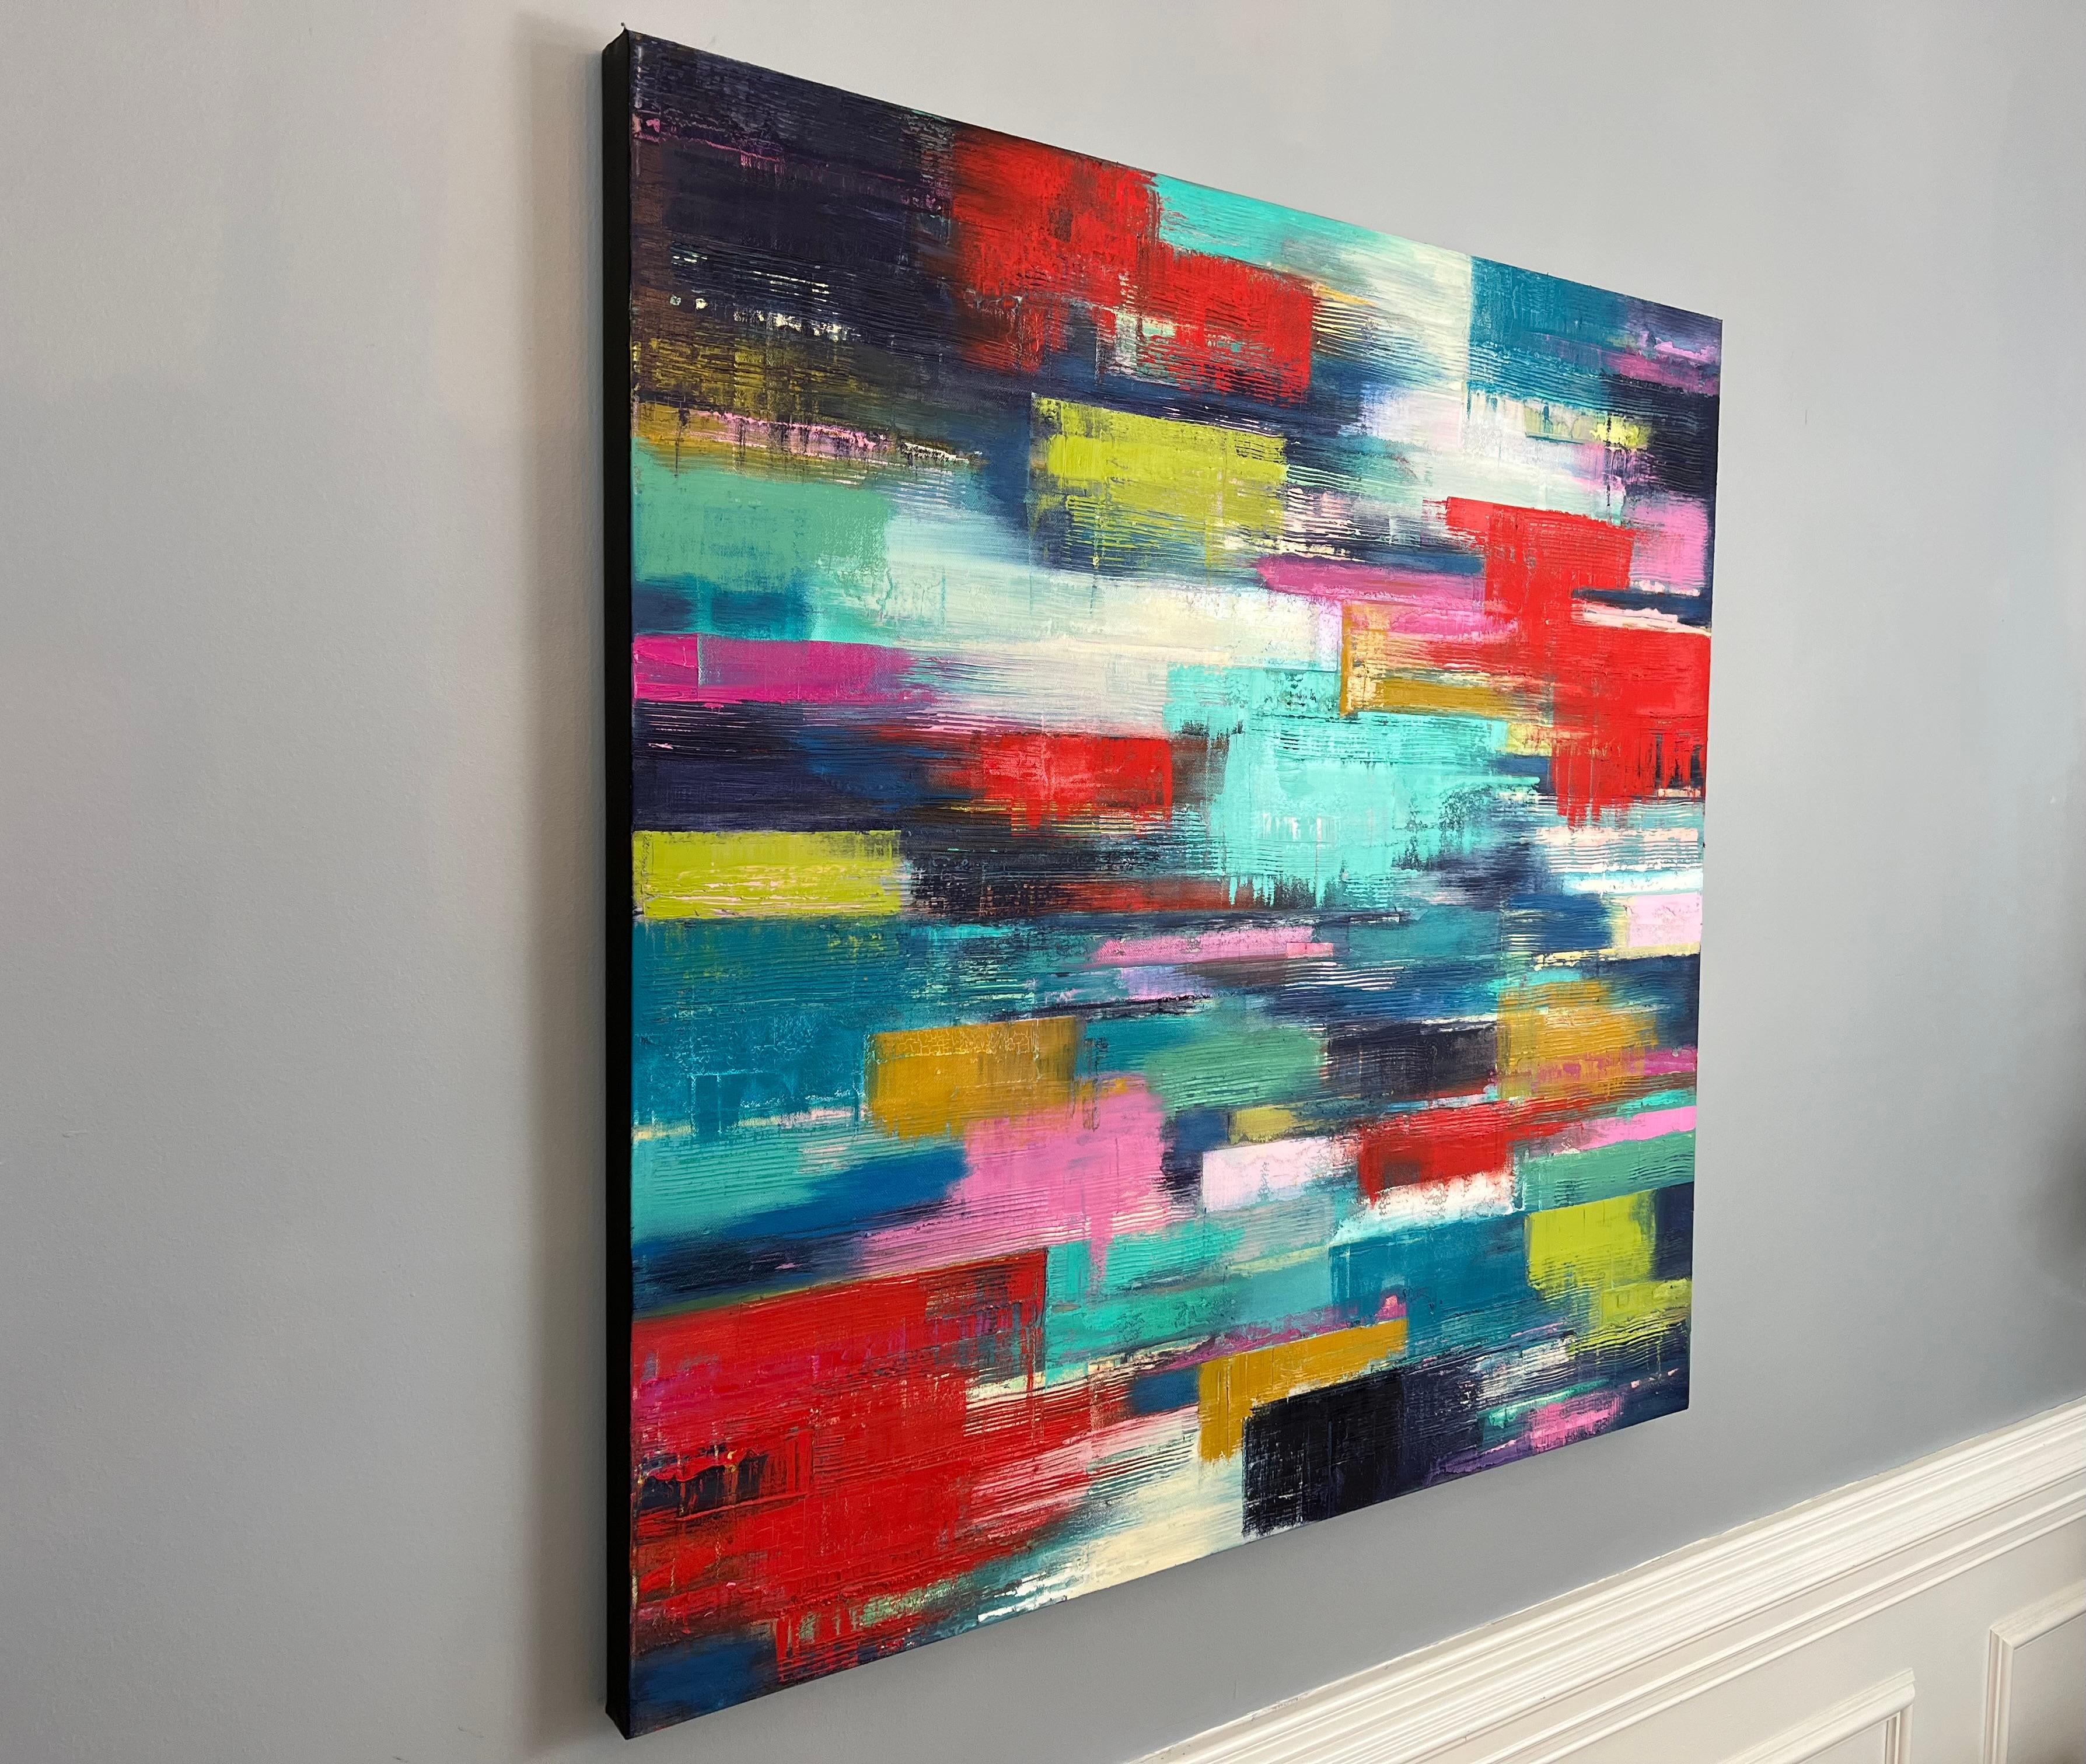 <p>Artist Comments<br>Artist Janet Hamilton displays a vibrant and energetic abstract. Janet balances the composition with lively pops of red and yellow amidst linear applications of blues and teals. 